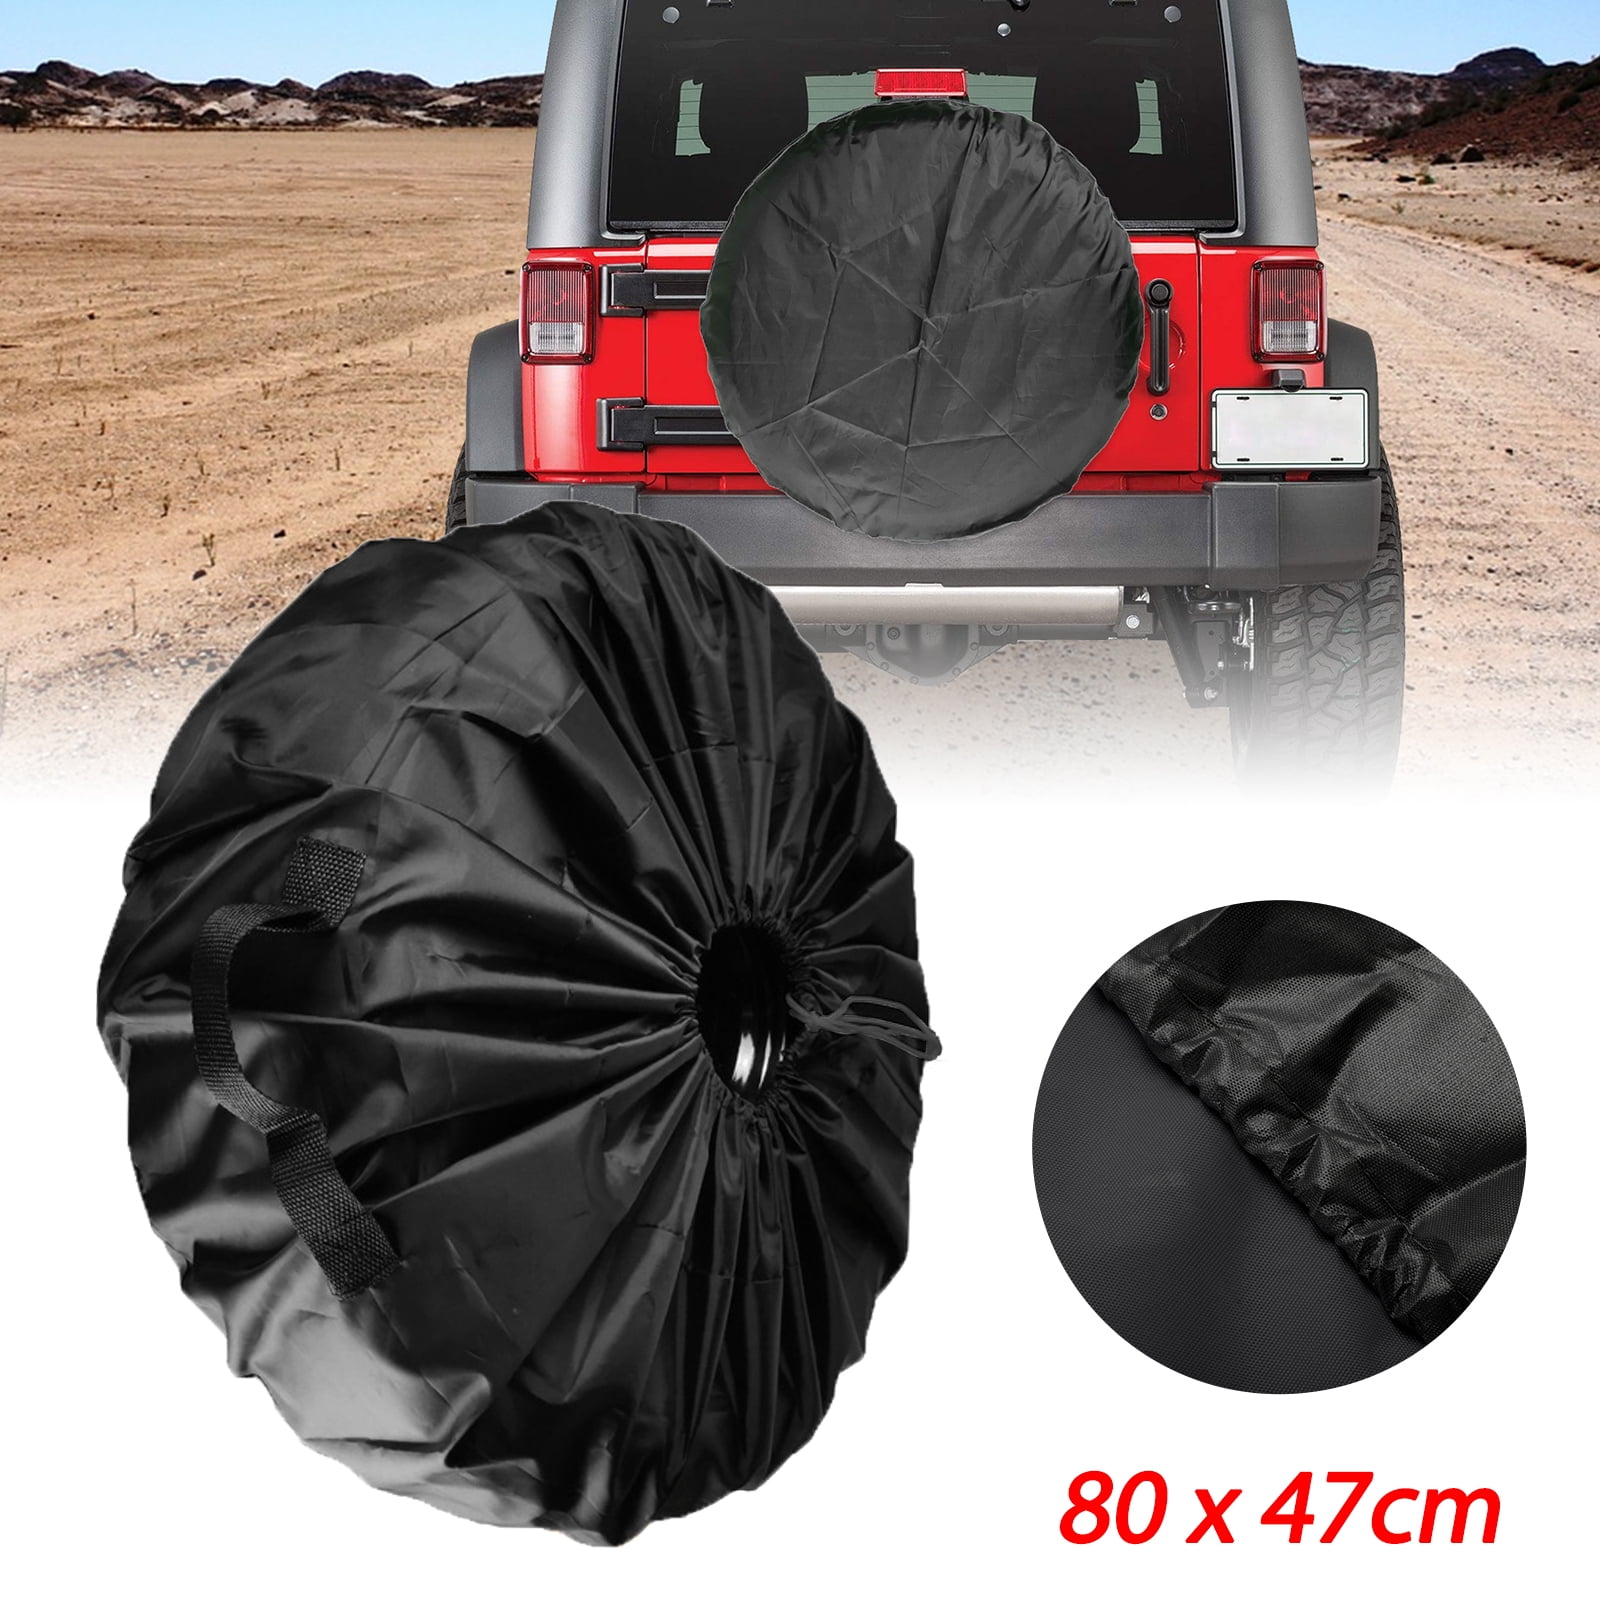 4 Pcs Wheel Tire Covers For RV Trailer Camper Car Offroad Truck to 31" Diameter